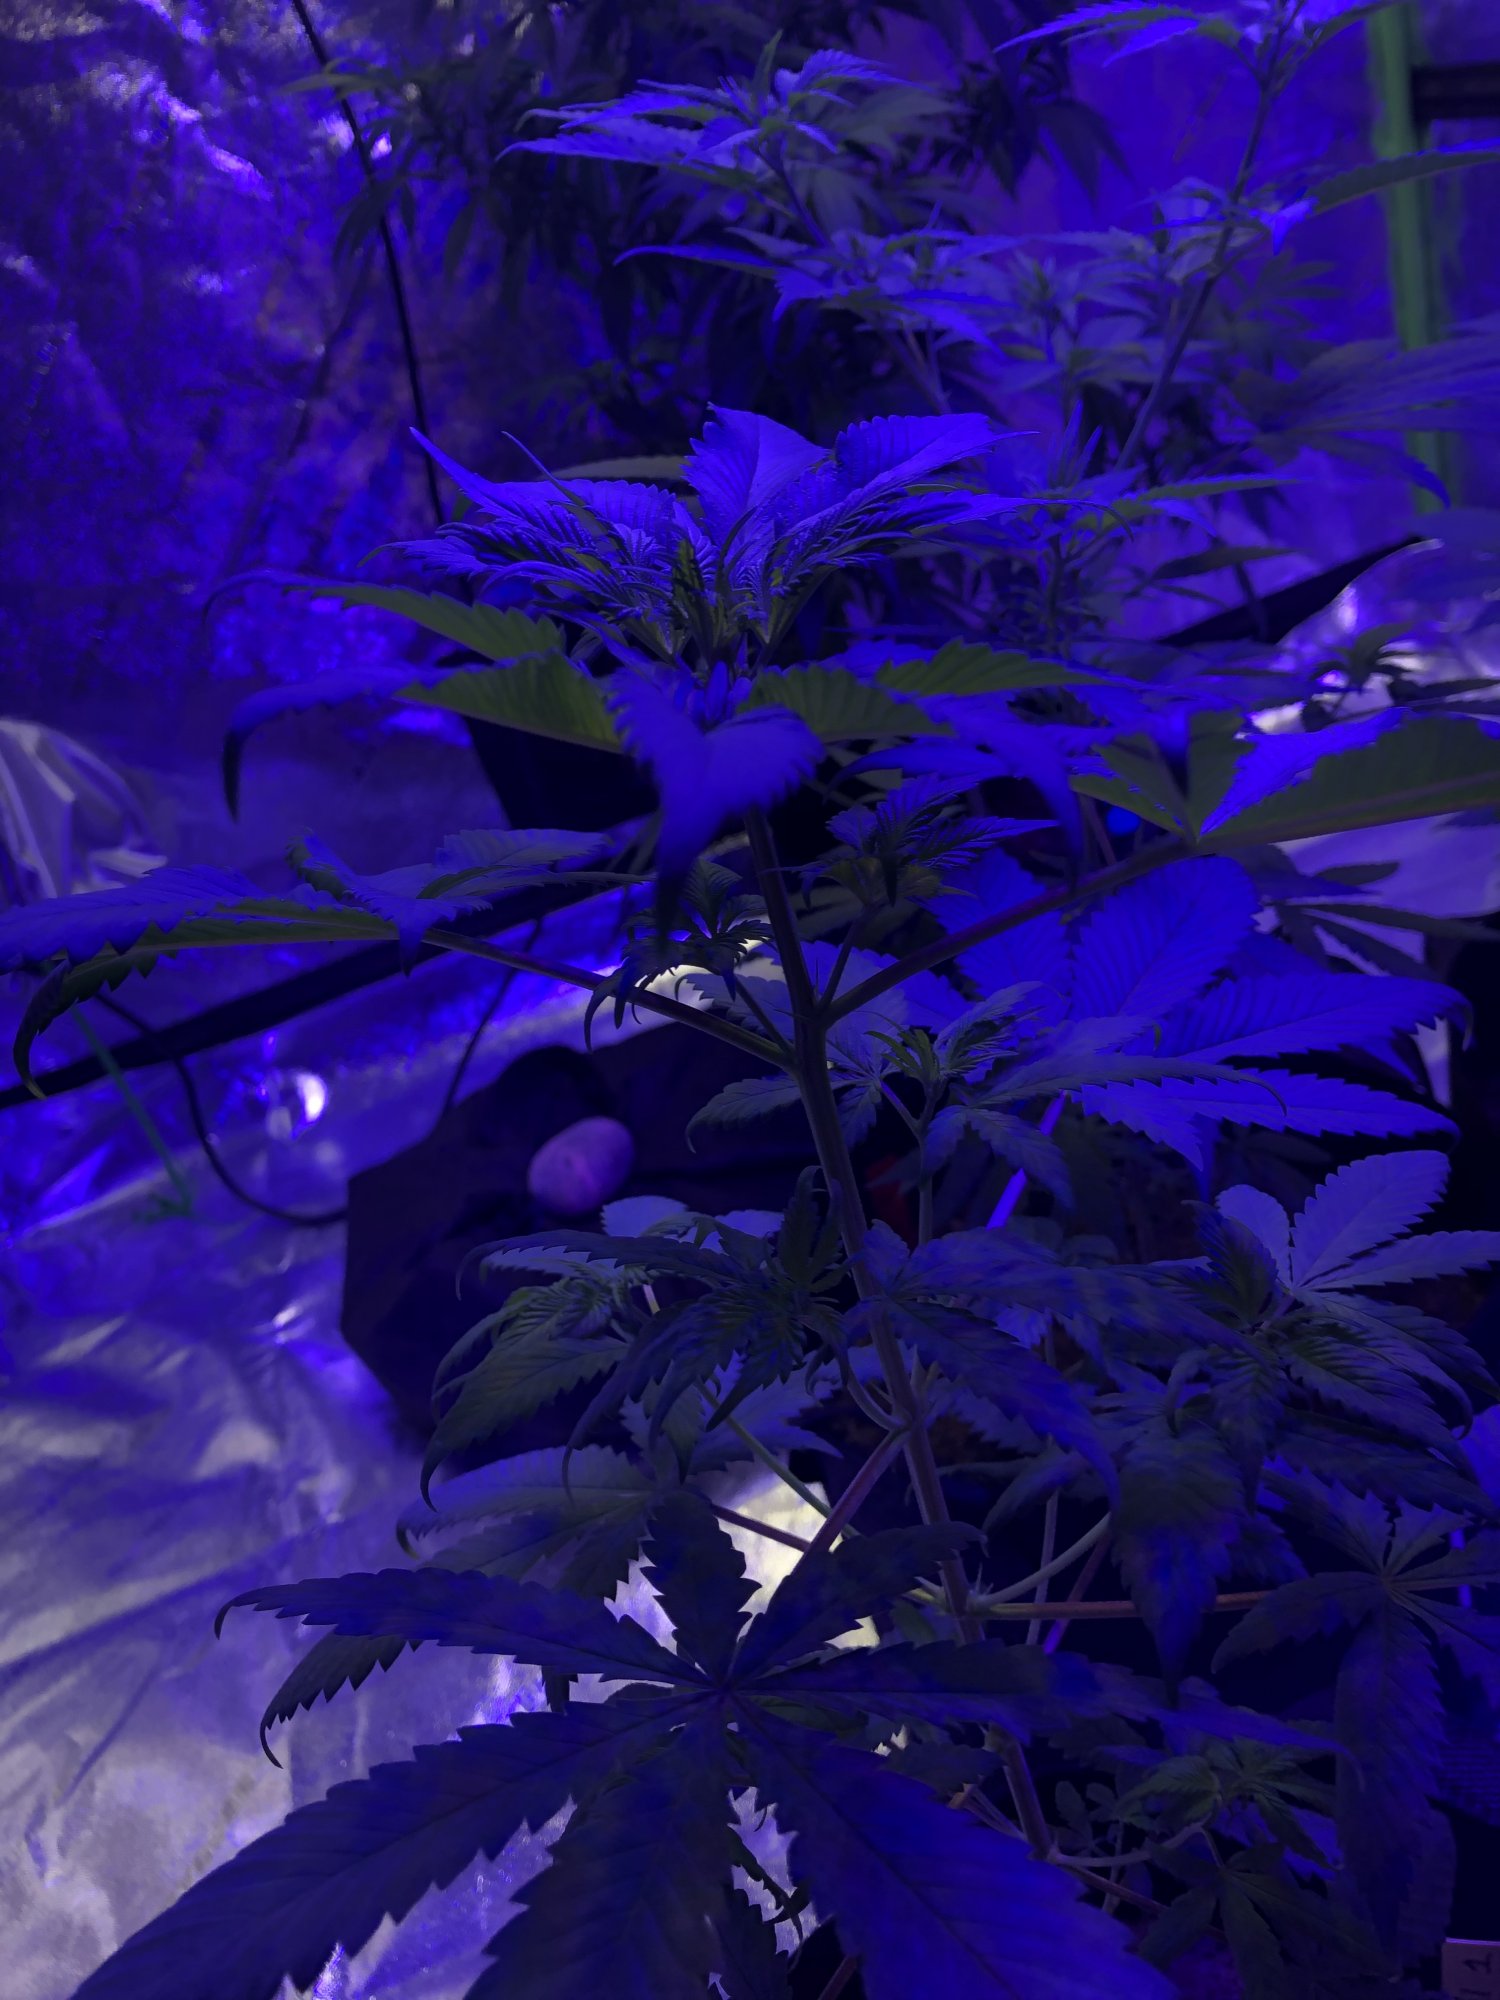 Cloning and nute burn 7